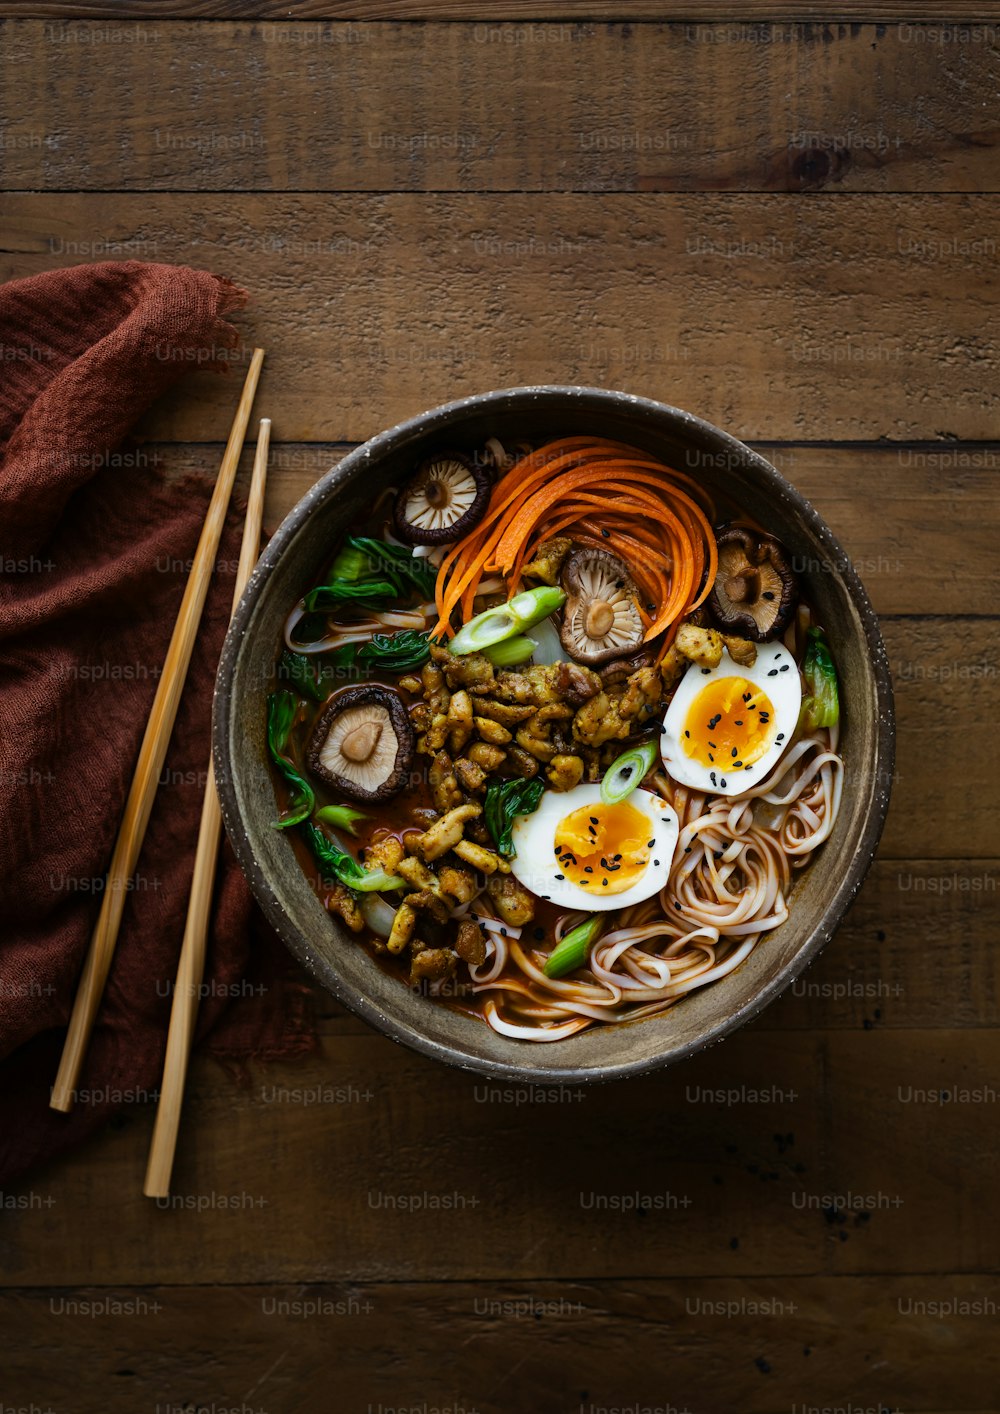 a bowl of noodles, carrots, mushrooms, and eggs